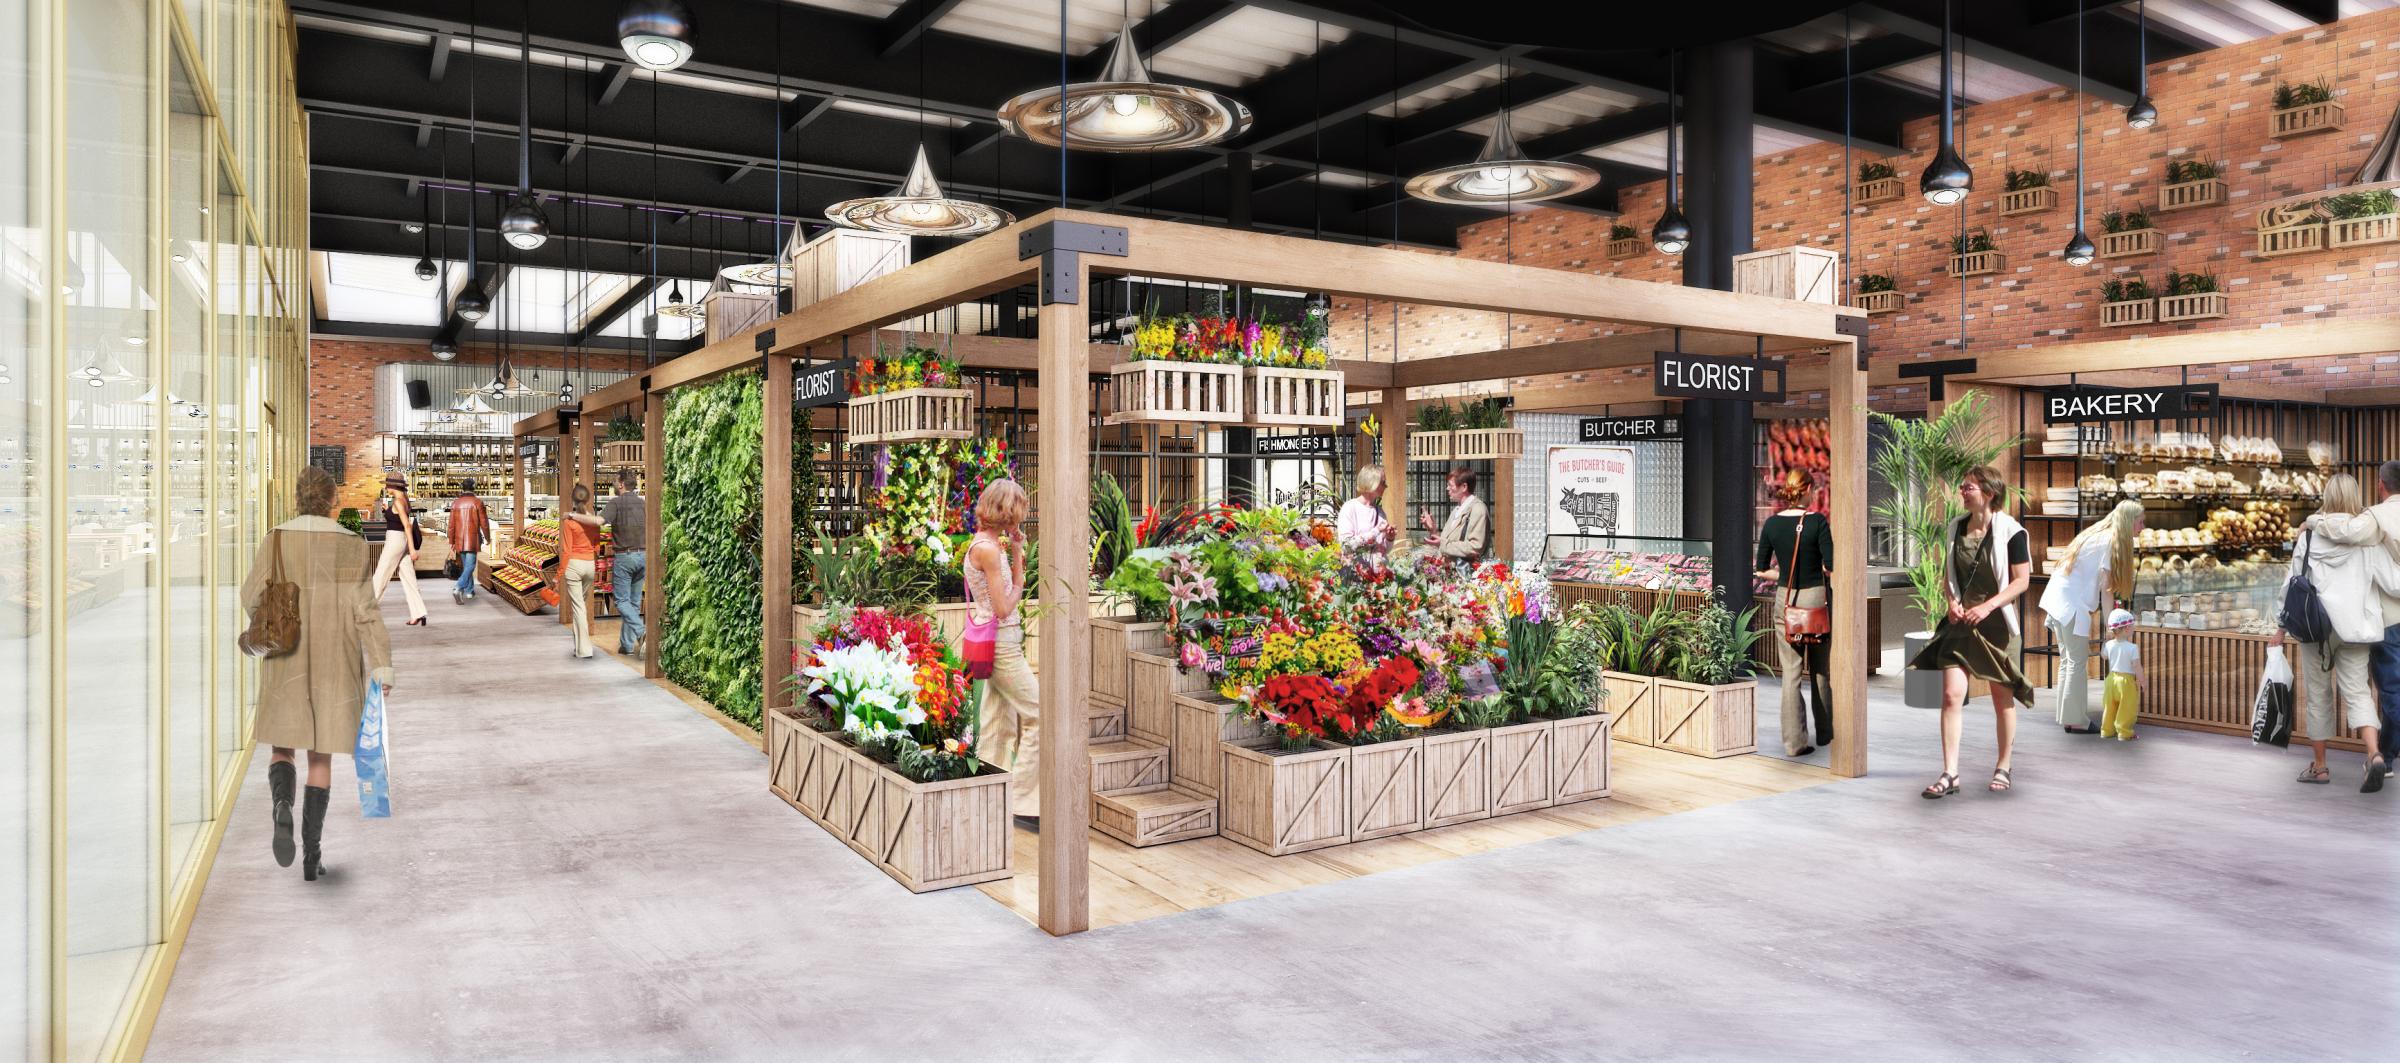 An artists impression of the new Chester Market.